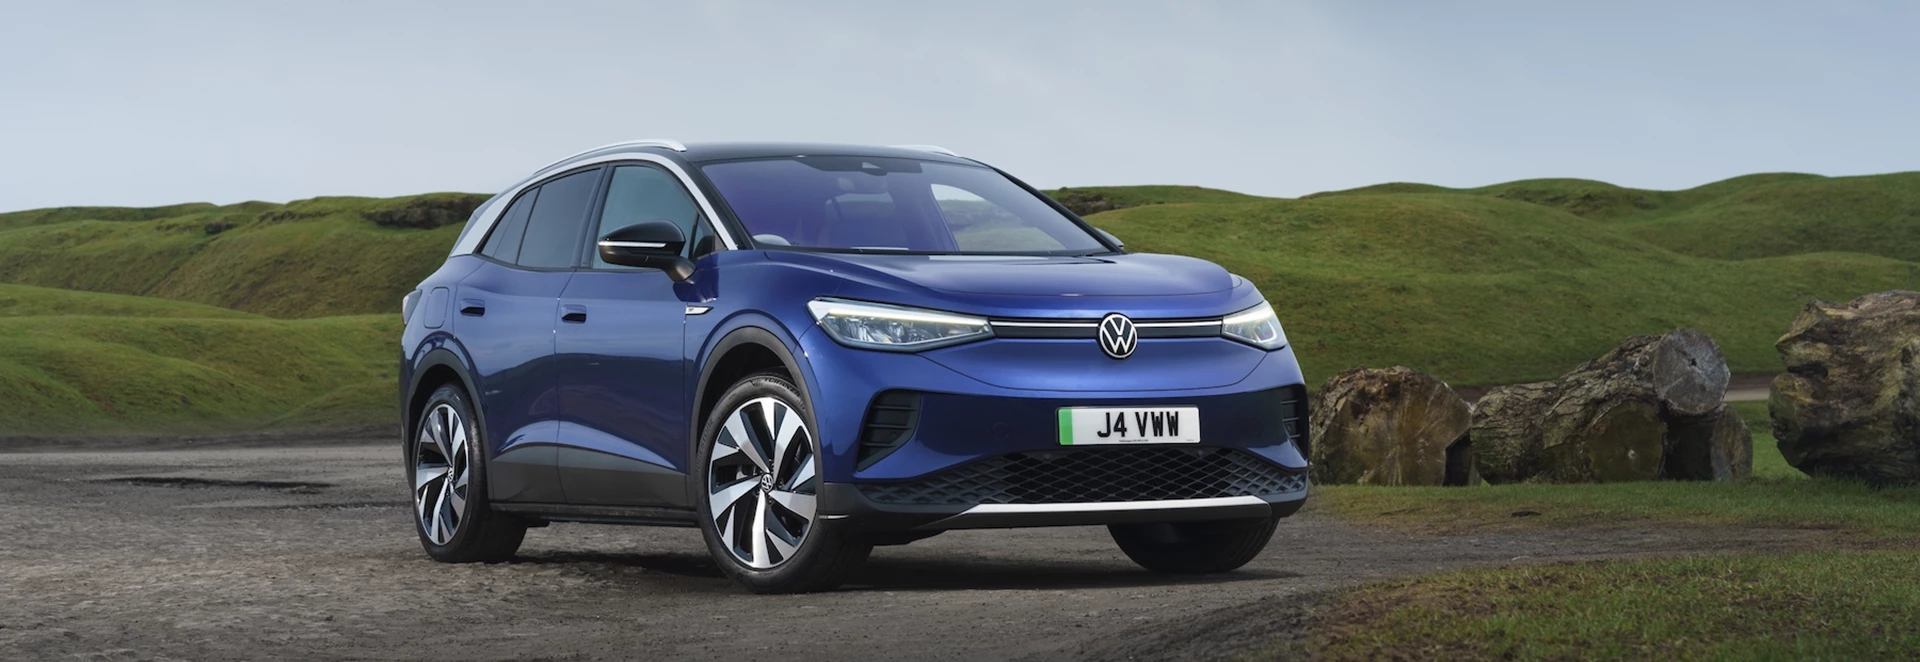 Volkswagen expands partnership with electric car subscription service Onto 